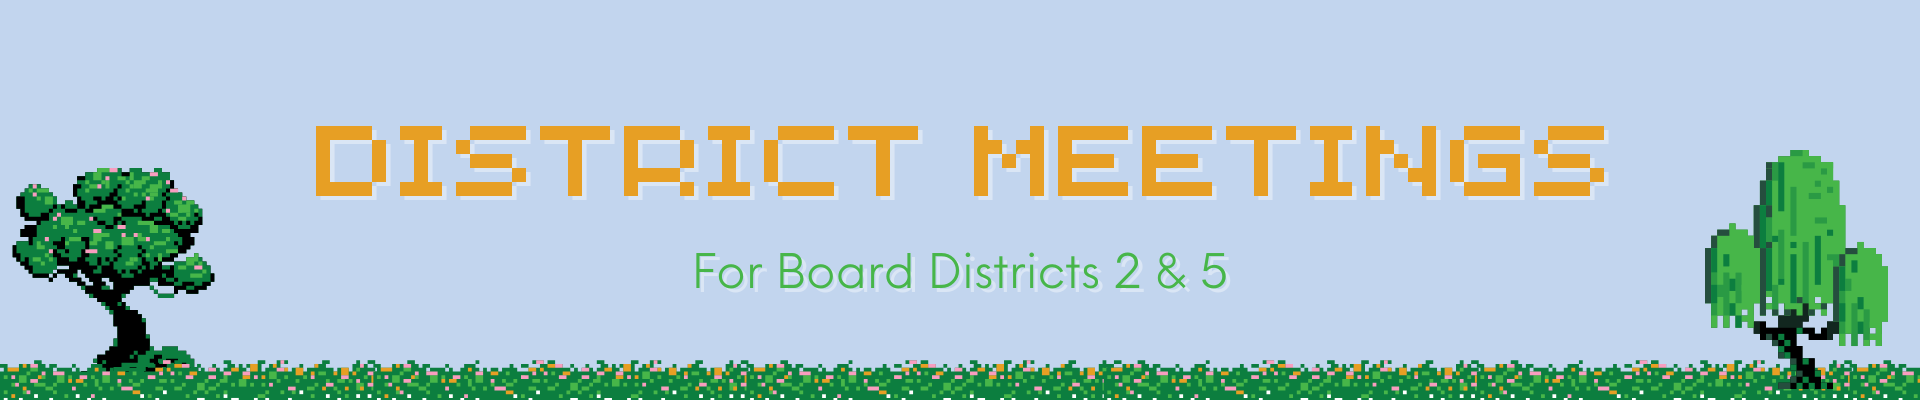 Decorative Banner, District meetings for Board Districts 2 & 5